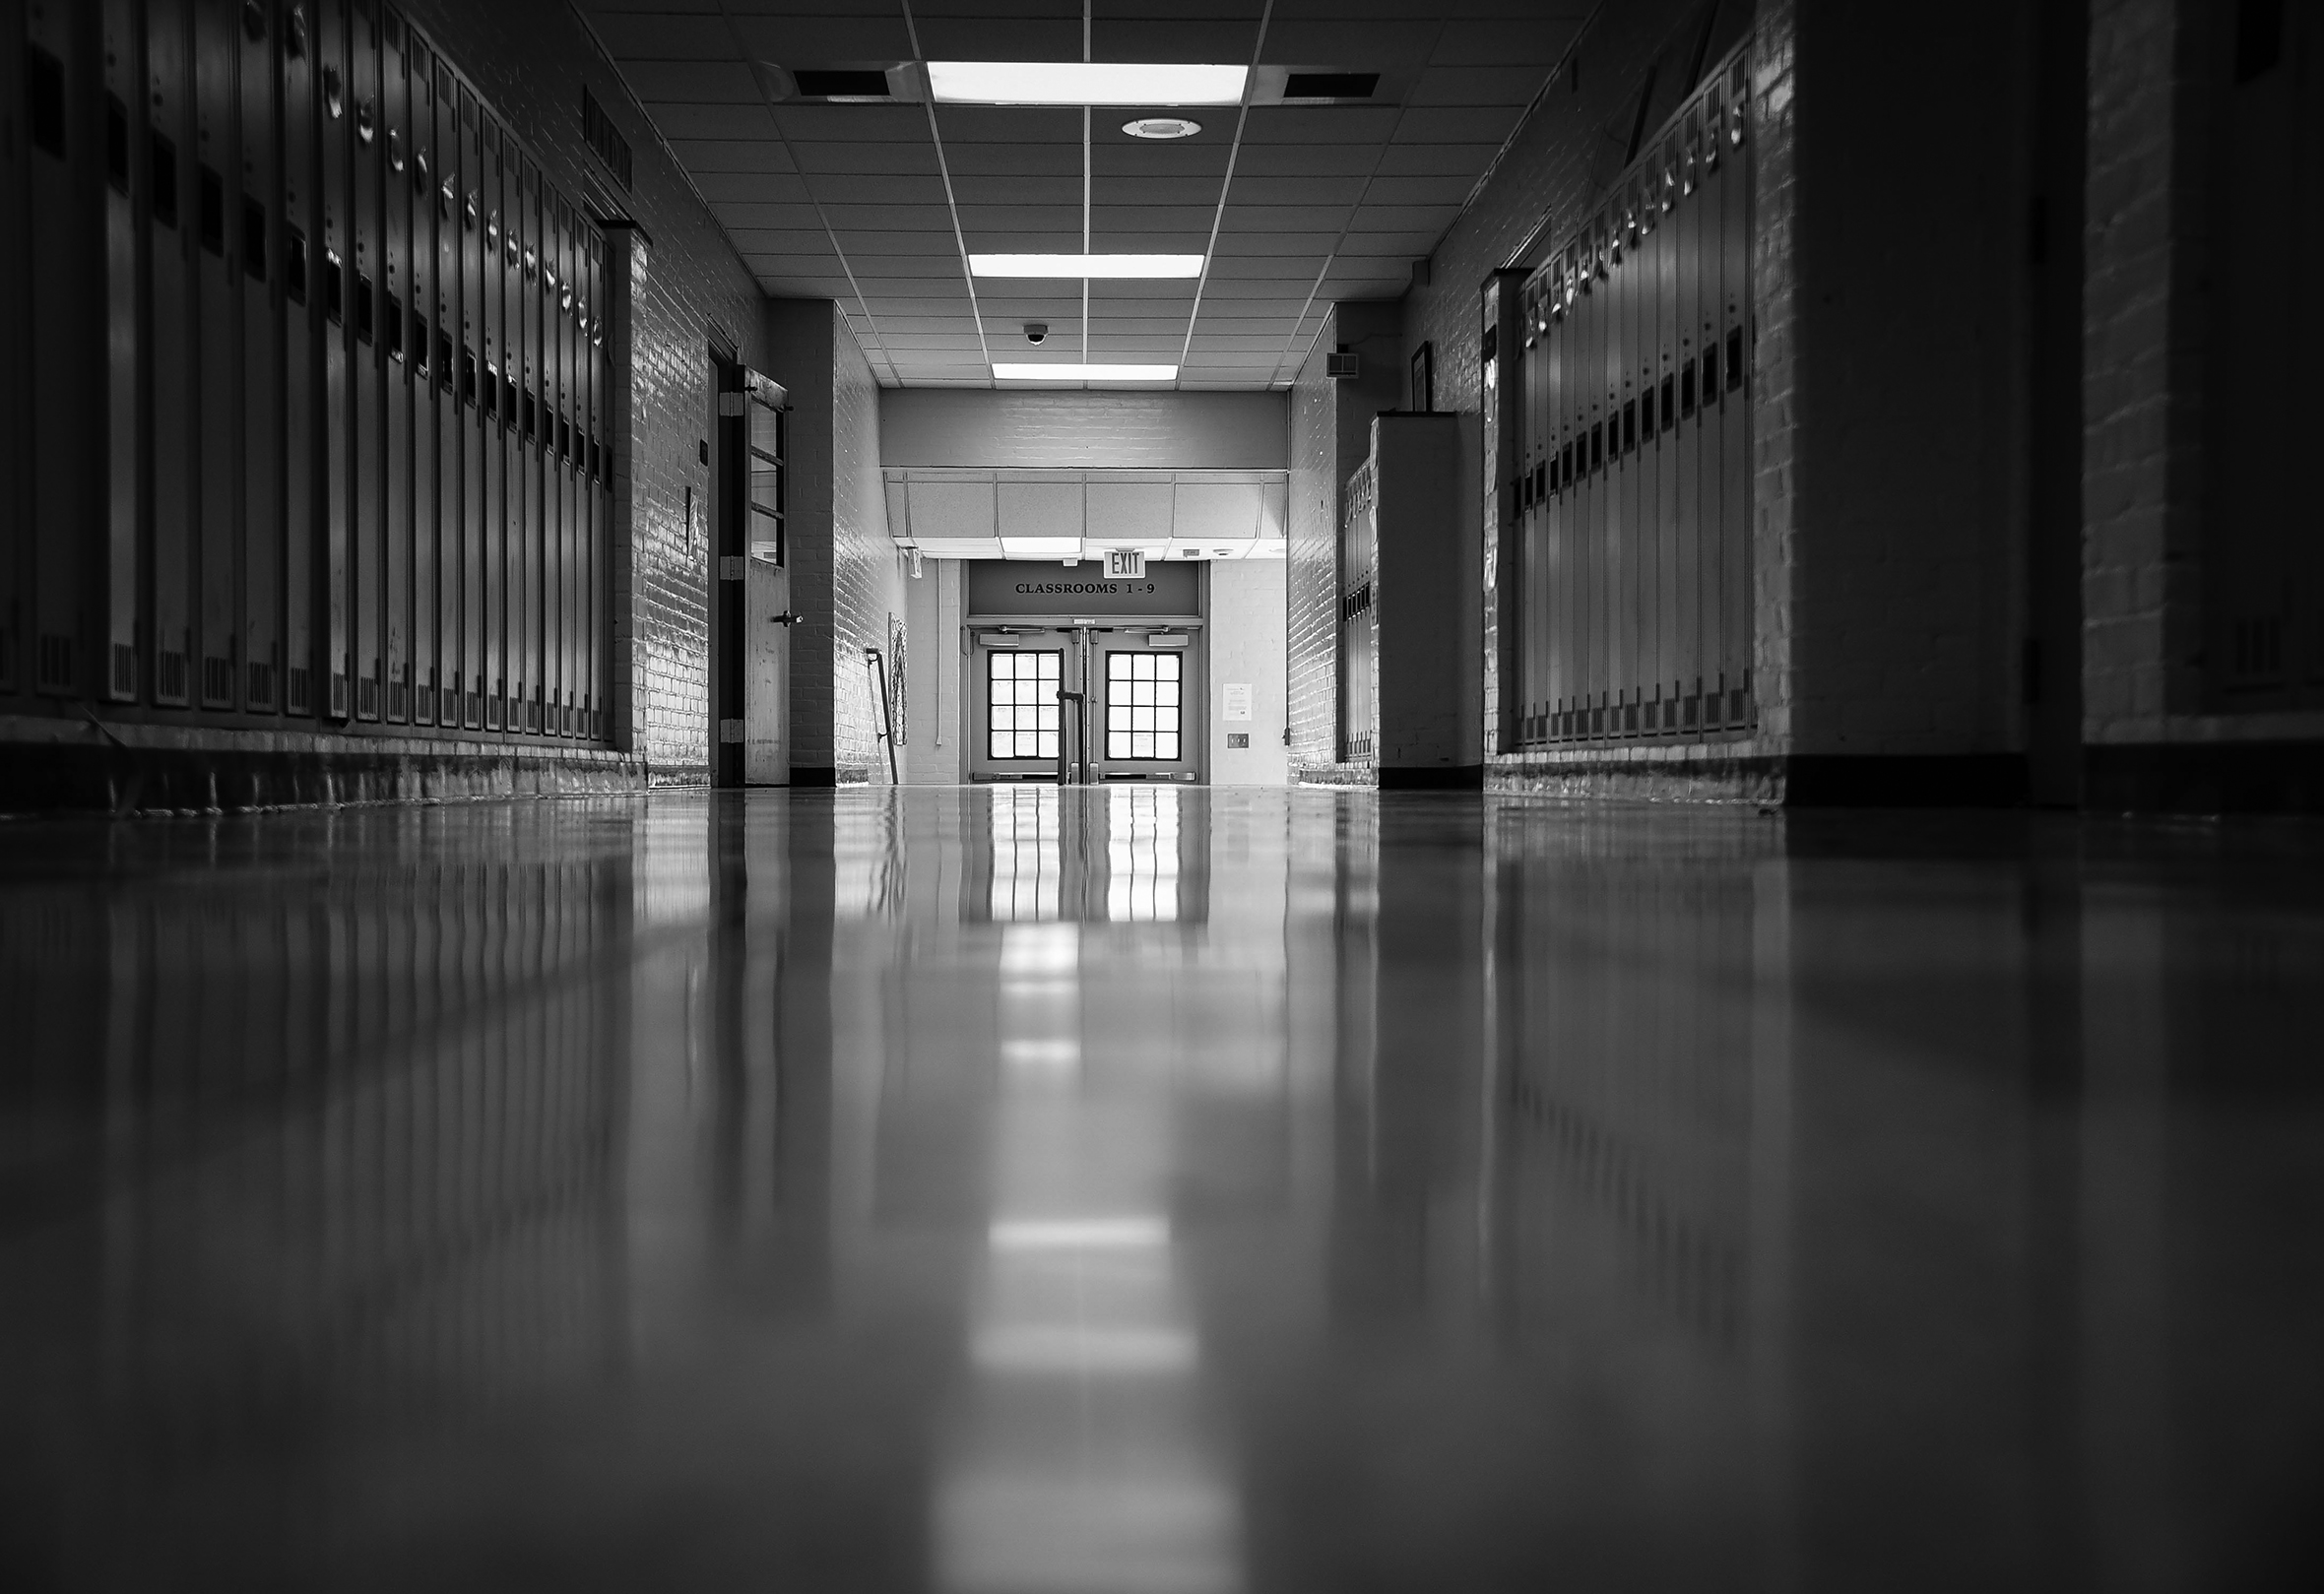 An empty school hallway lined with lockers and double-doors at the end of the hall.